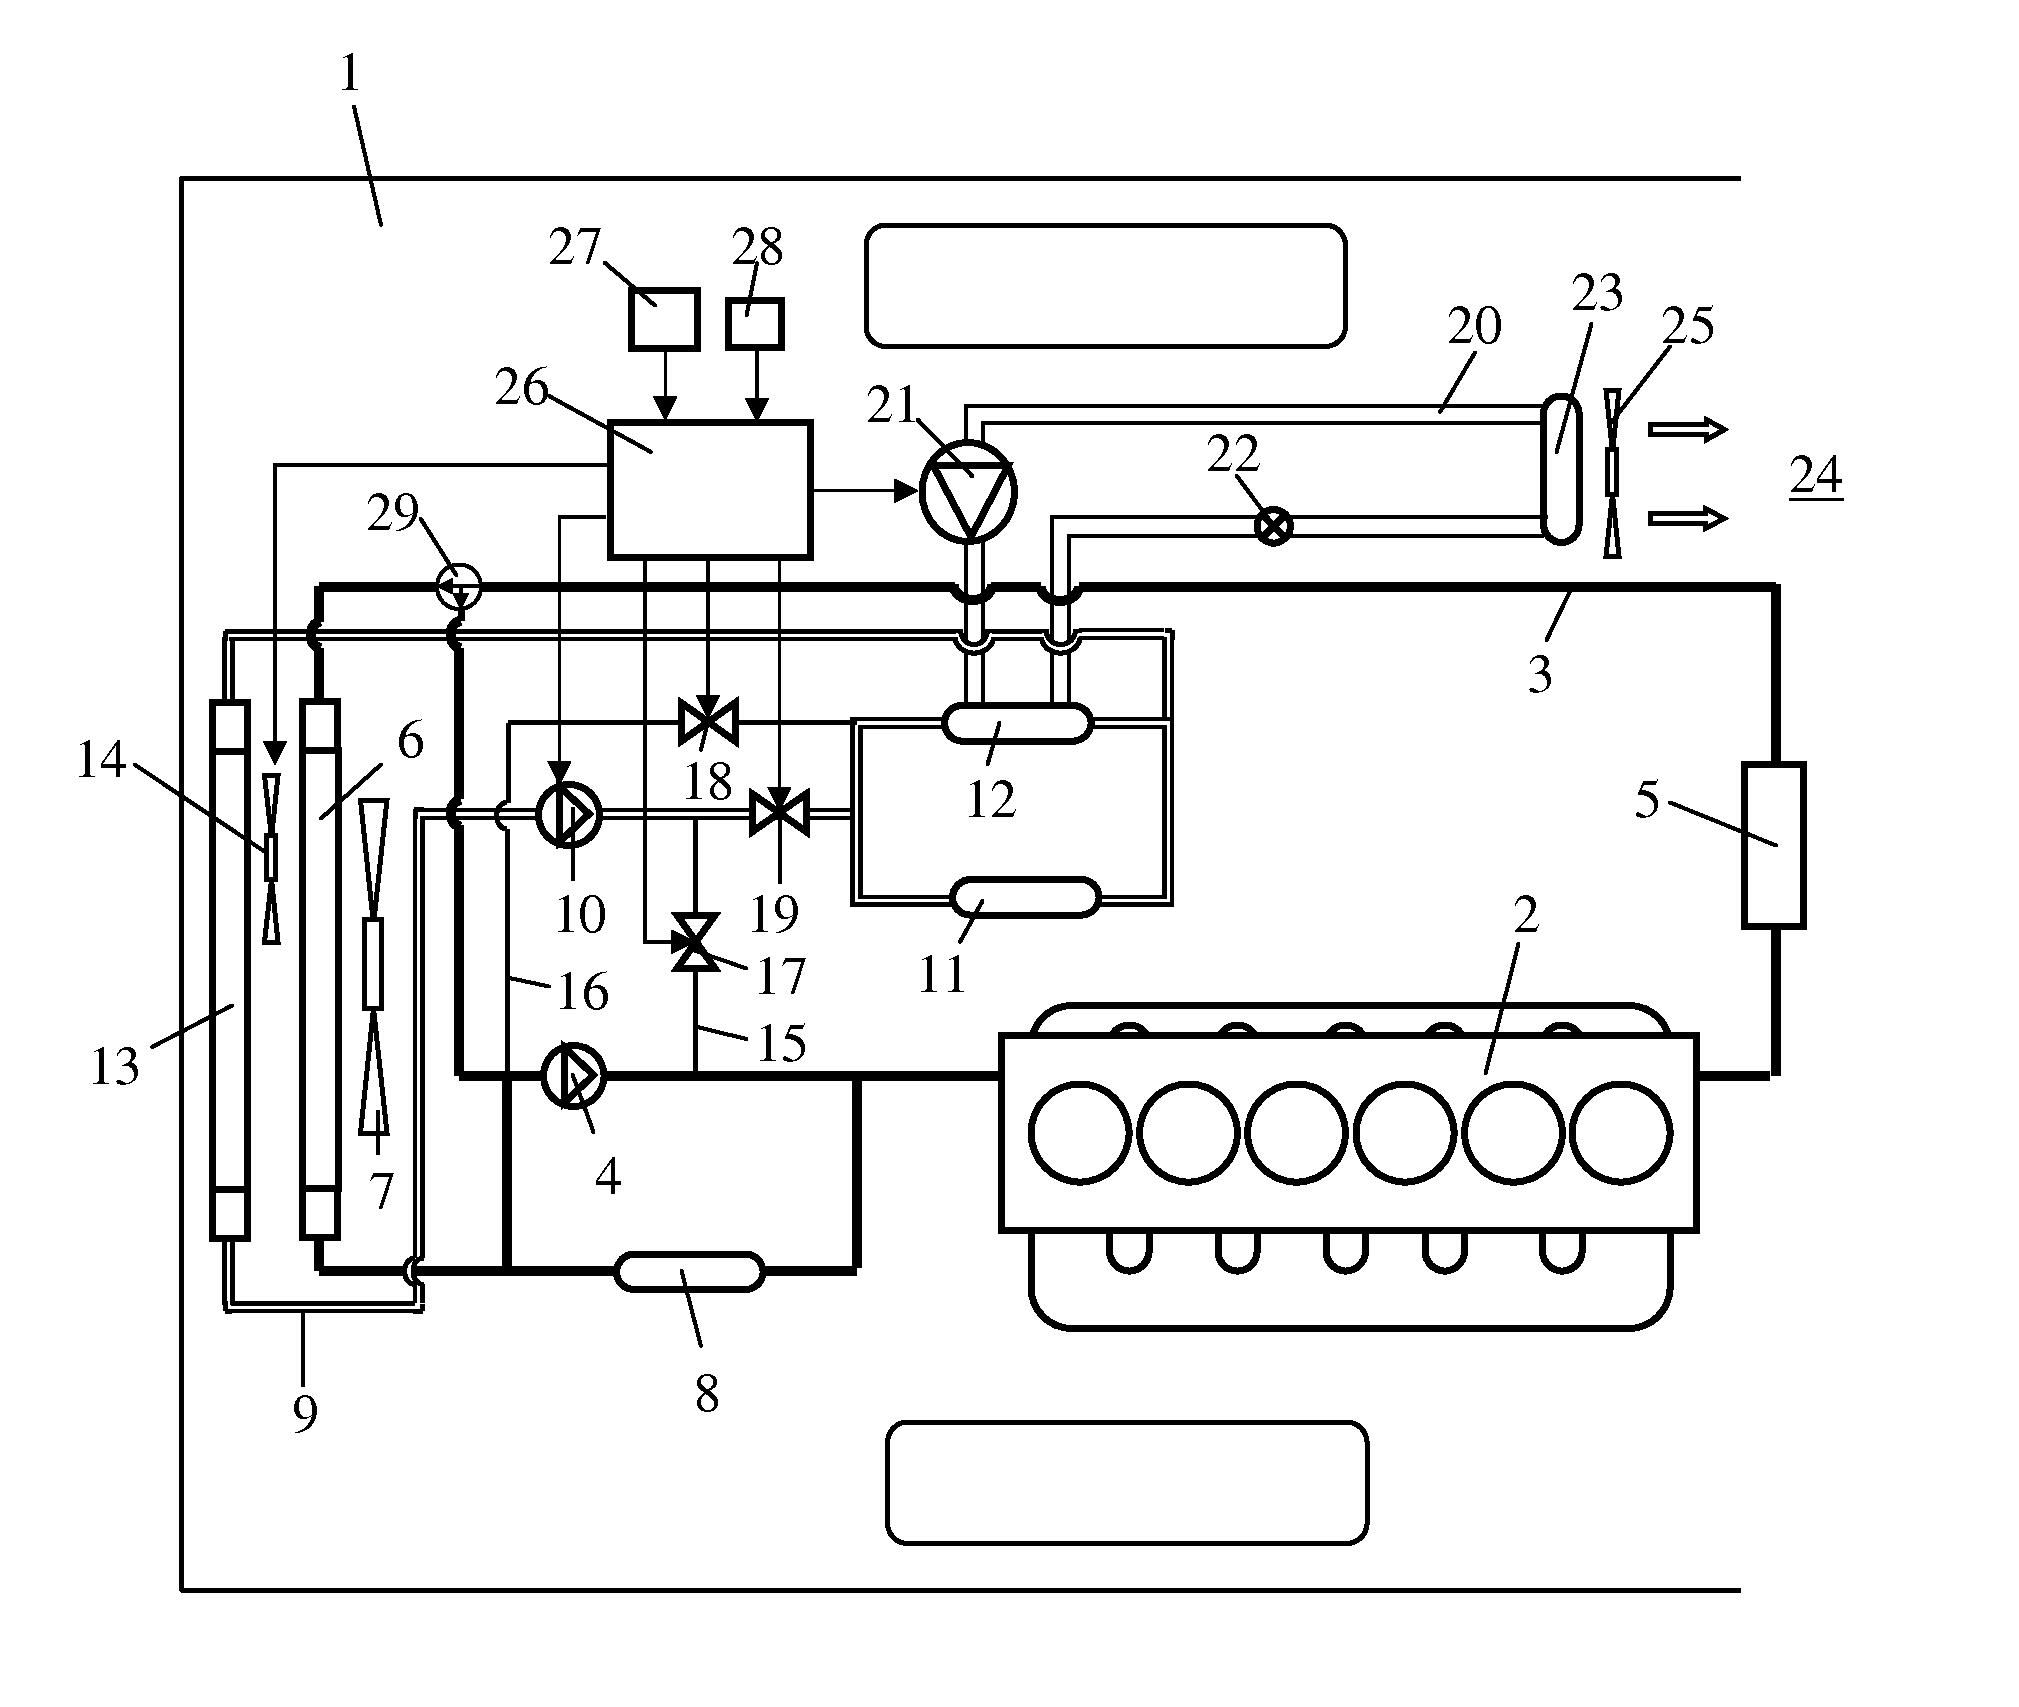 Radiator arrangement in a vehicle powered by a combustion engine